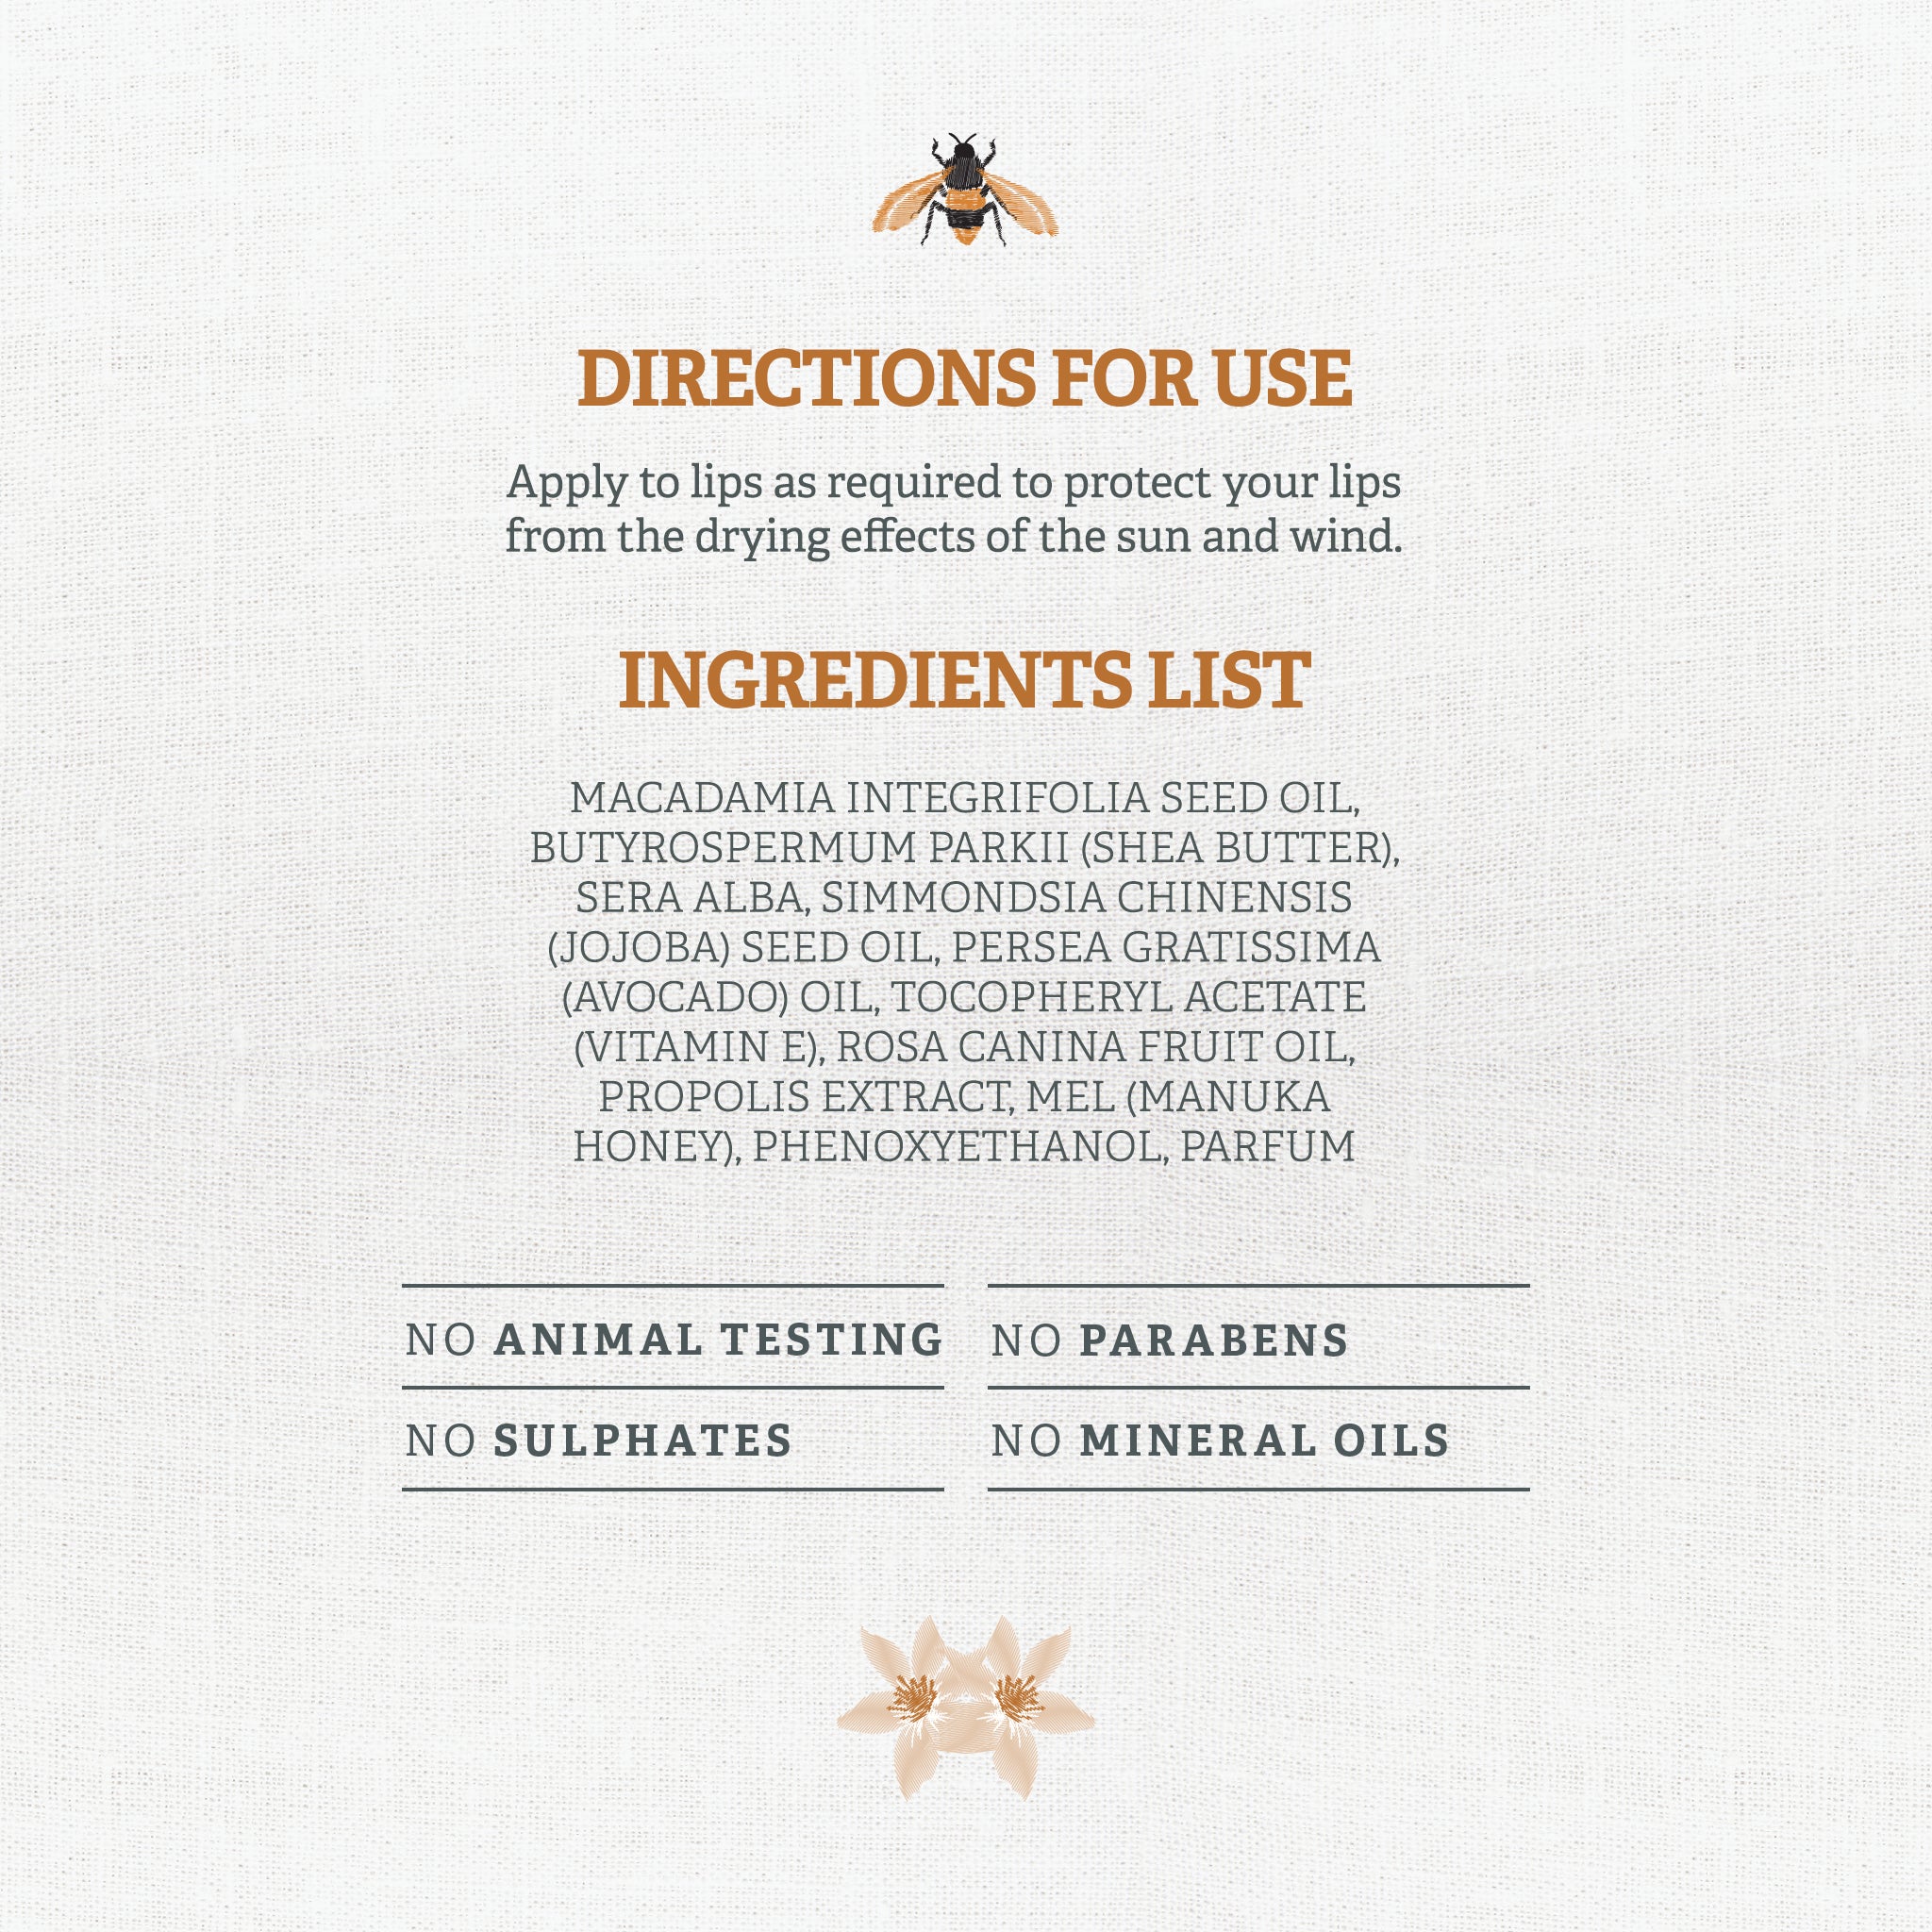 Wild Bee by Natural Life Moisturising Lip Balm - Directions for Use, Ingredients List